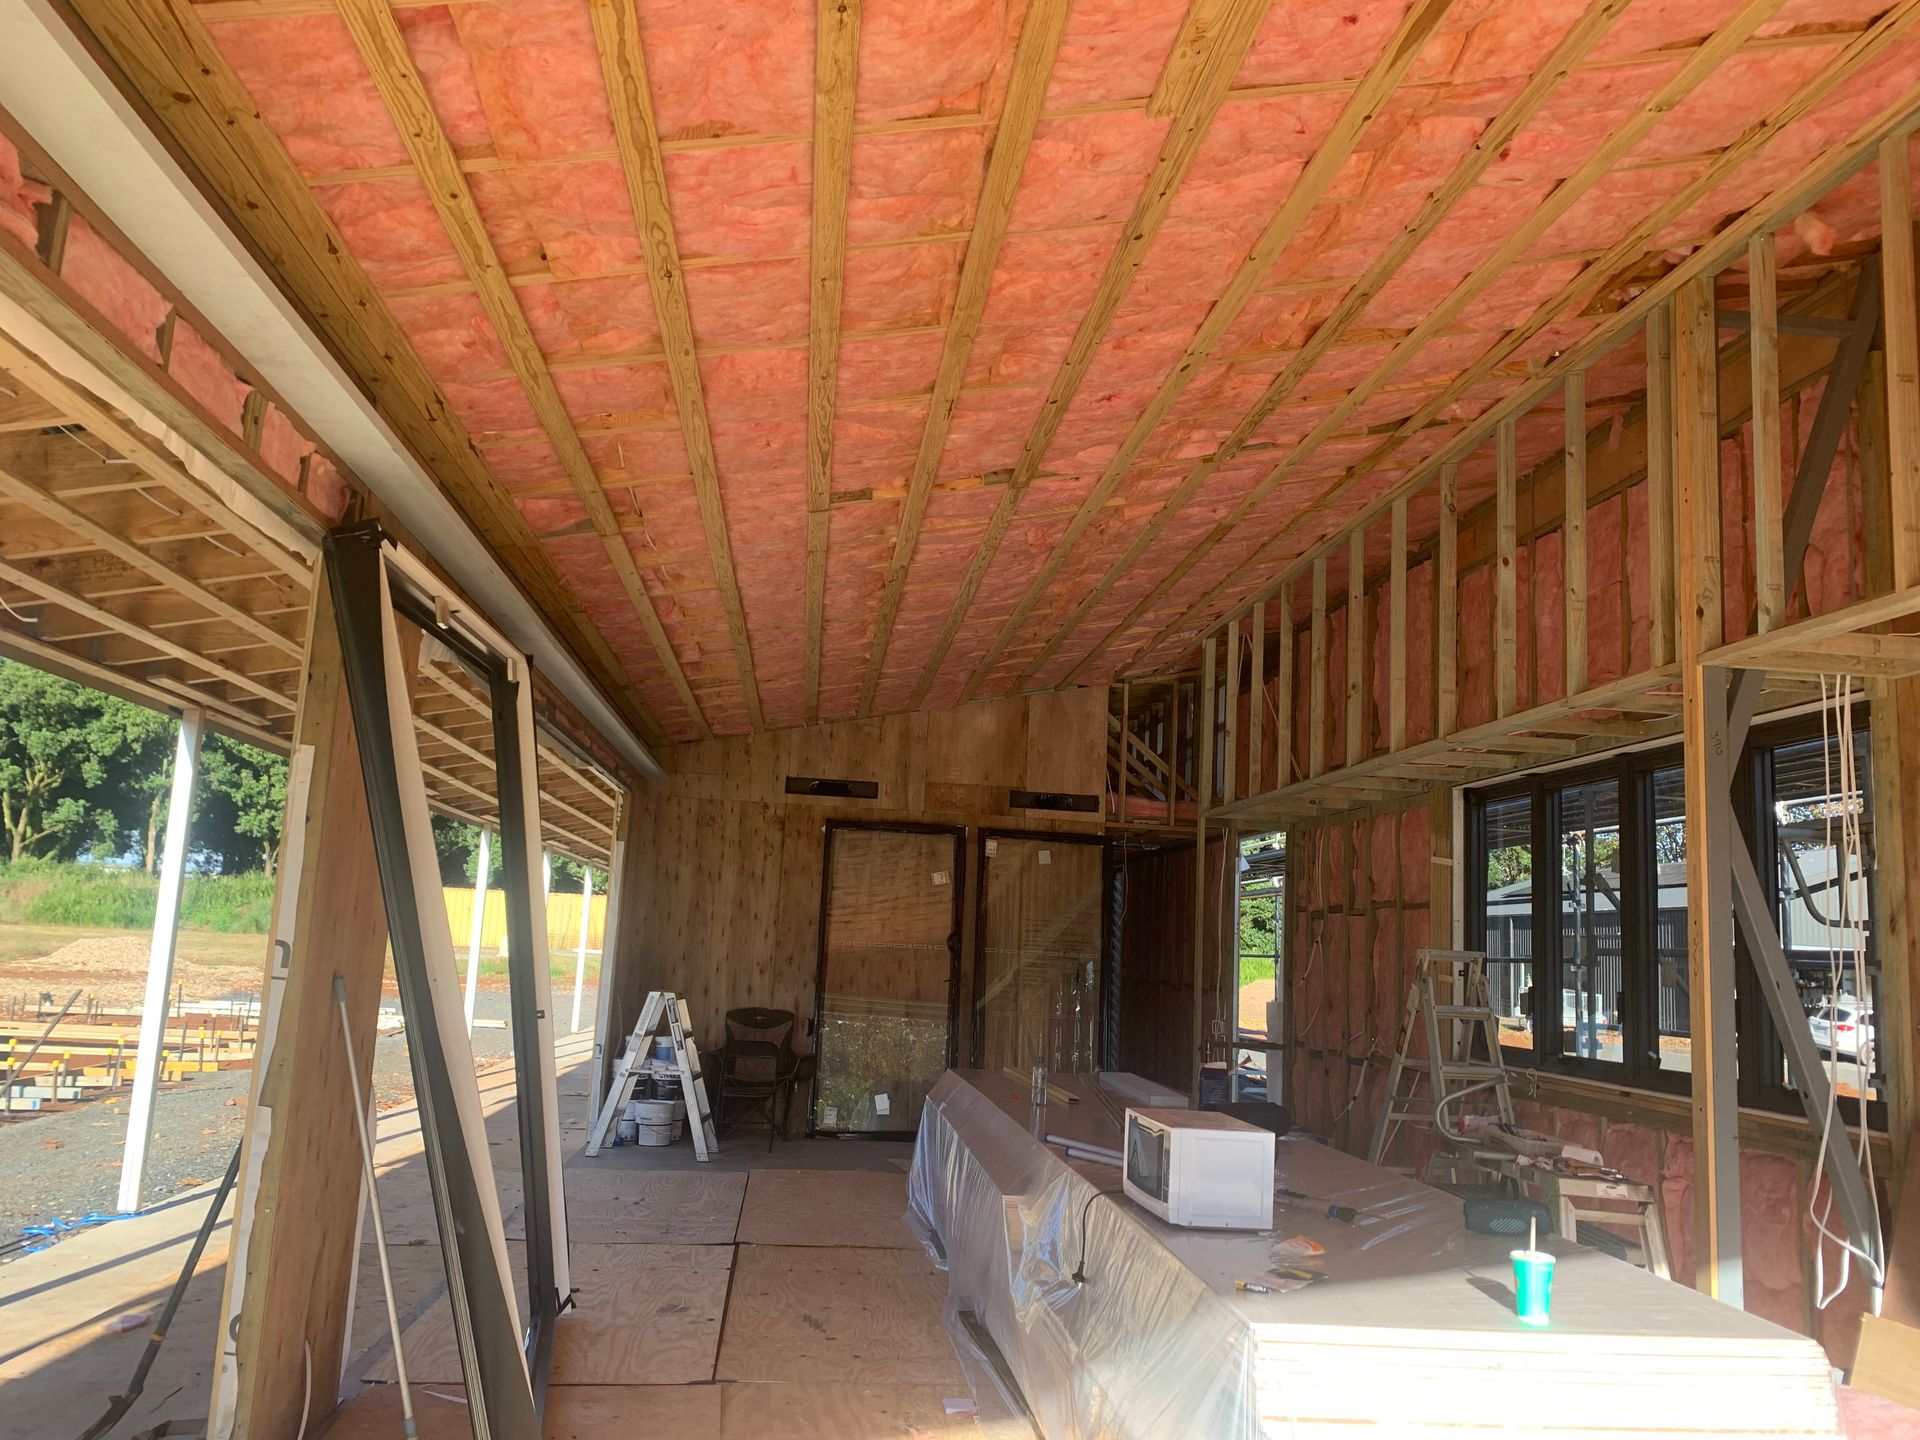 Installing Insulation in Roof